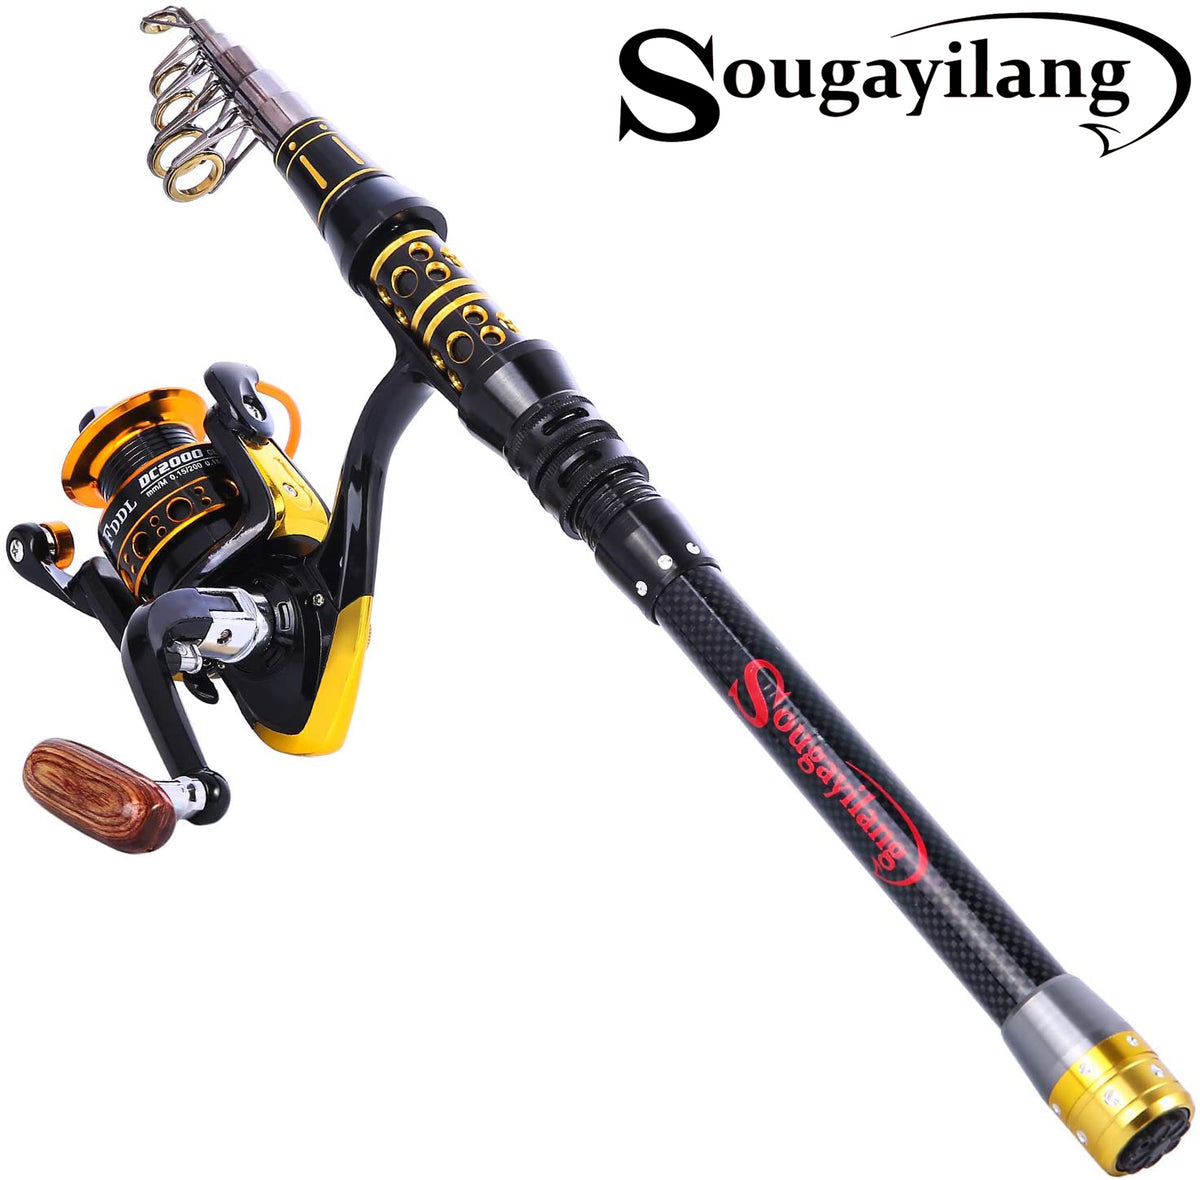 Sougayilang Telescopic Fishing Rod With Spinning Reel Combo Wq3000 Reel  1.8m Rod